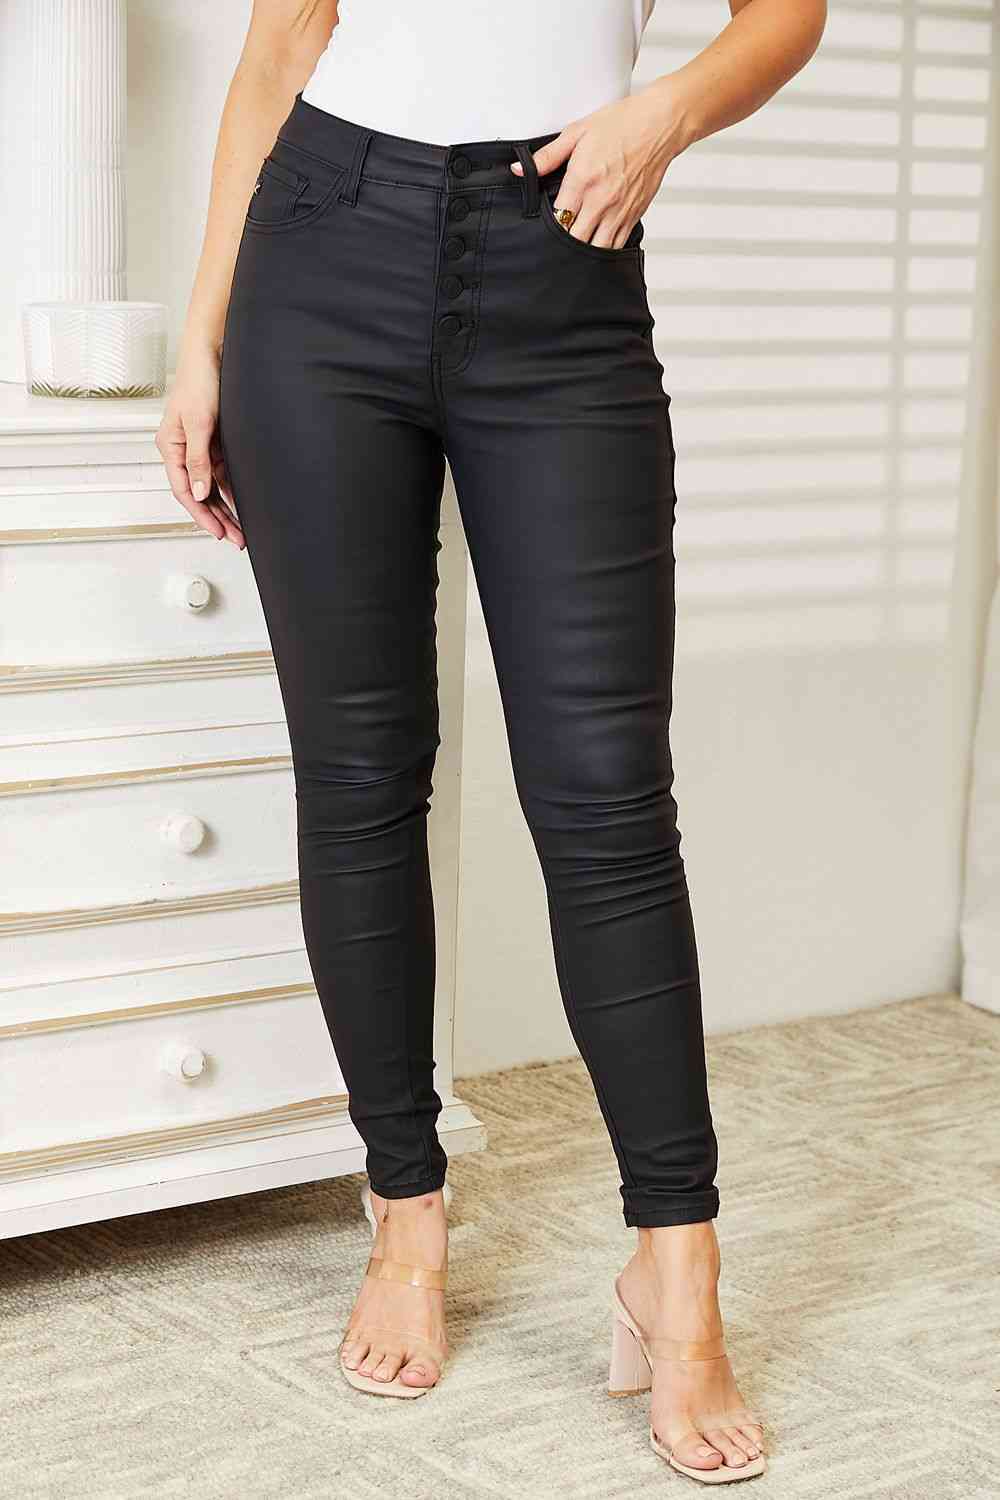 High Rise Black Coated Ankle Skinny Jeans